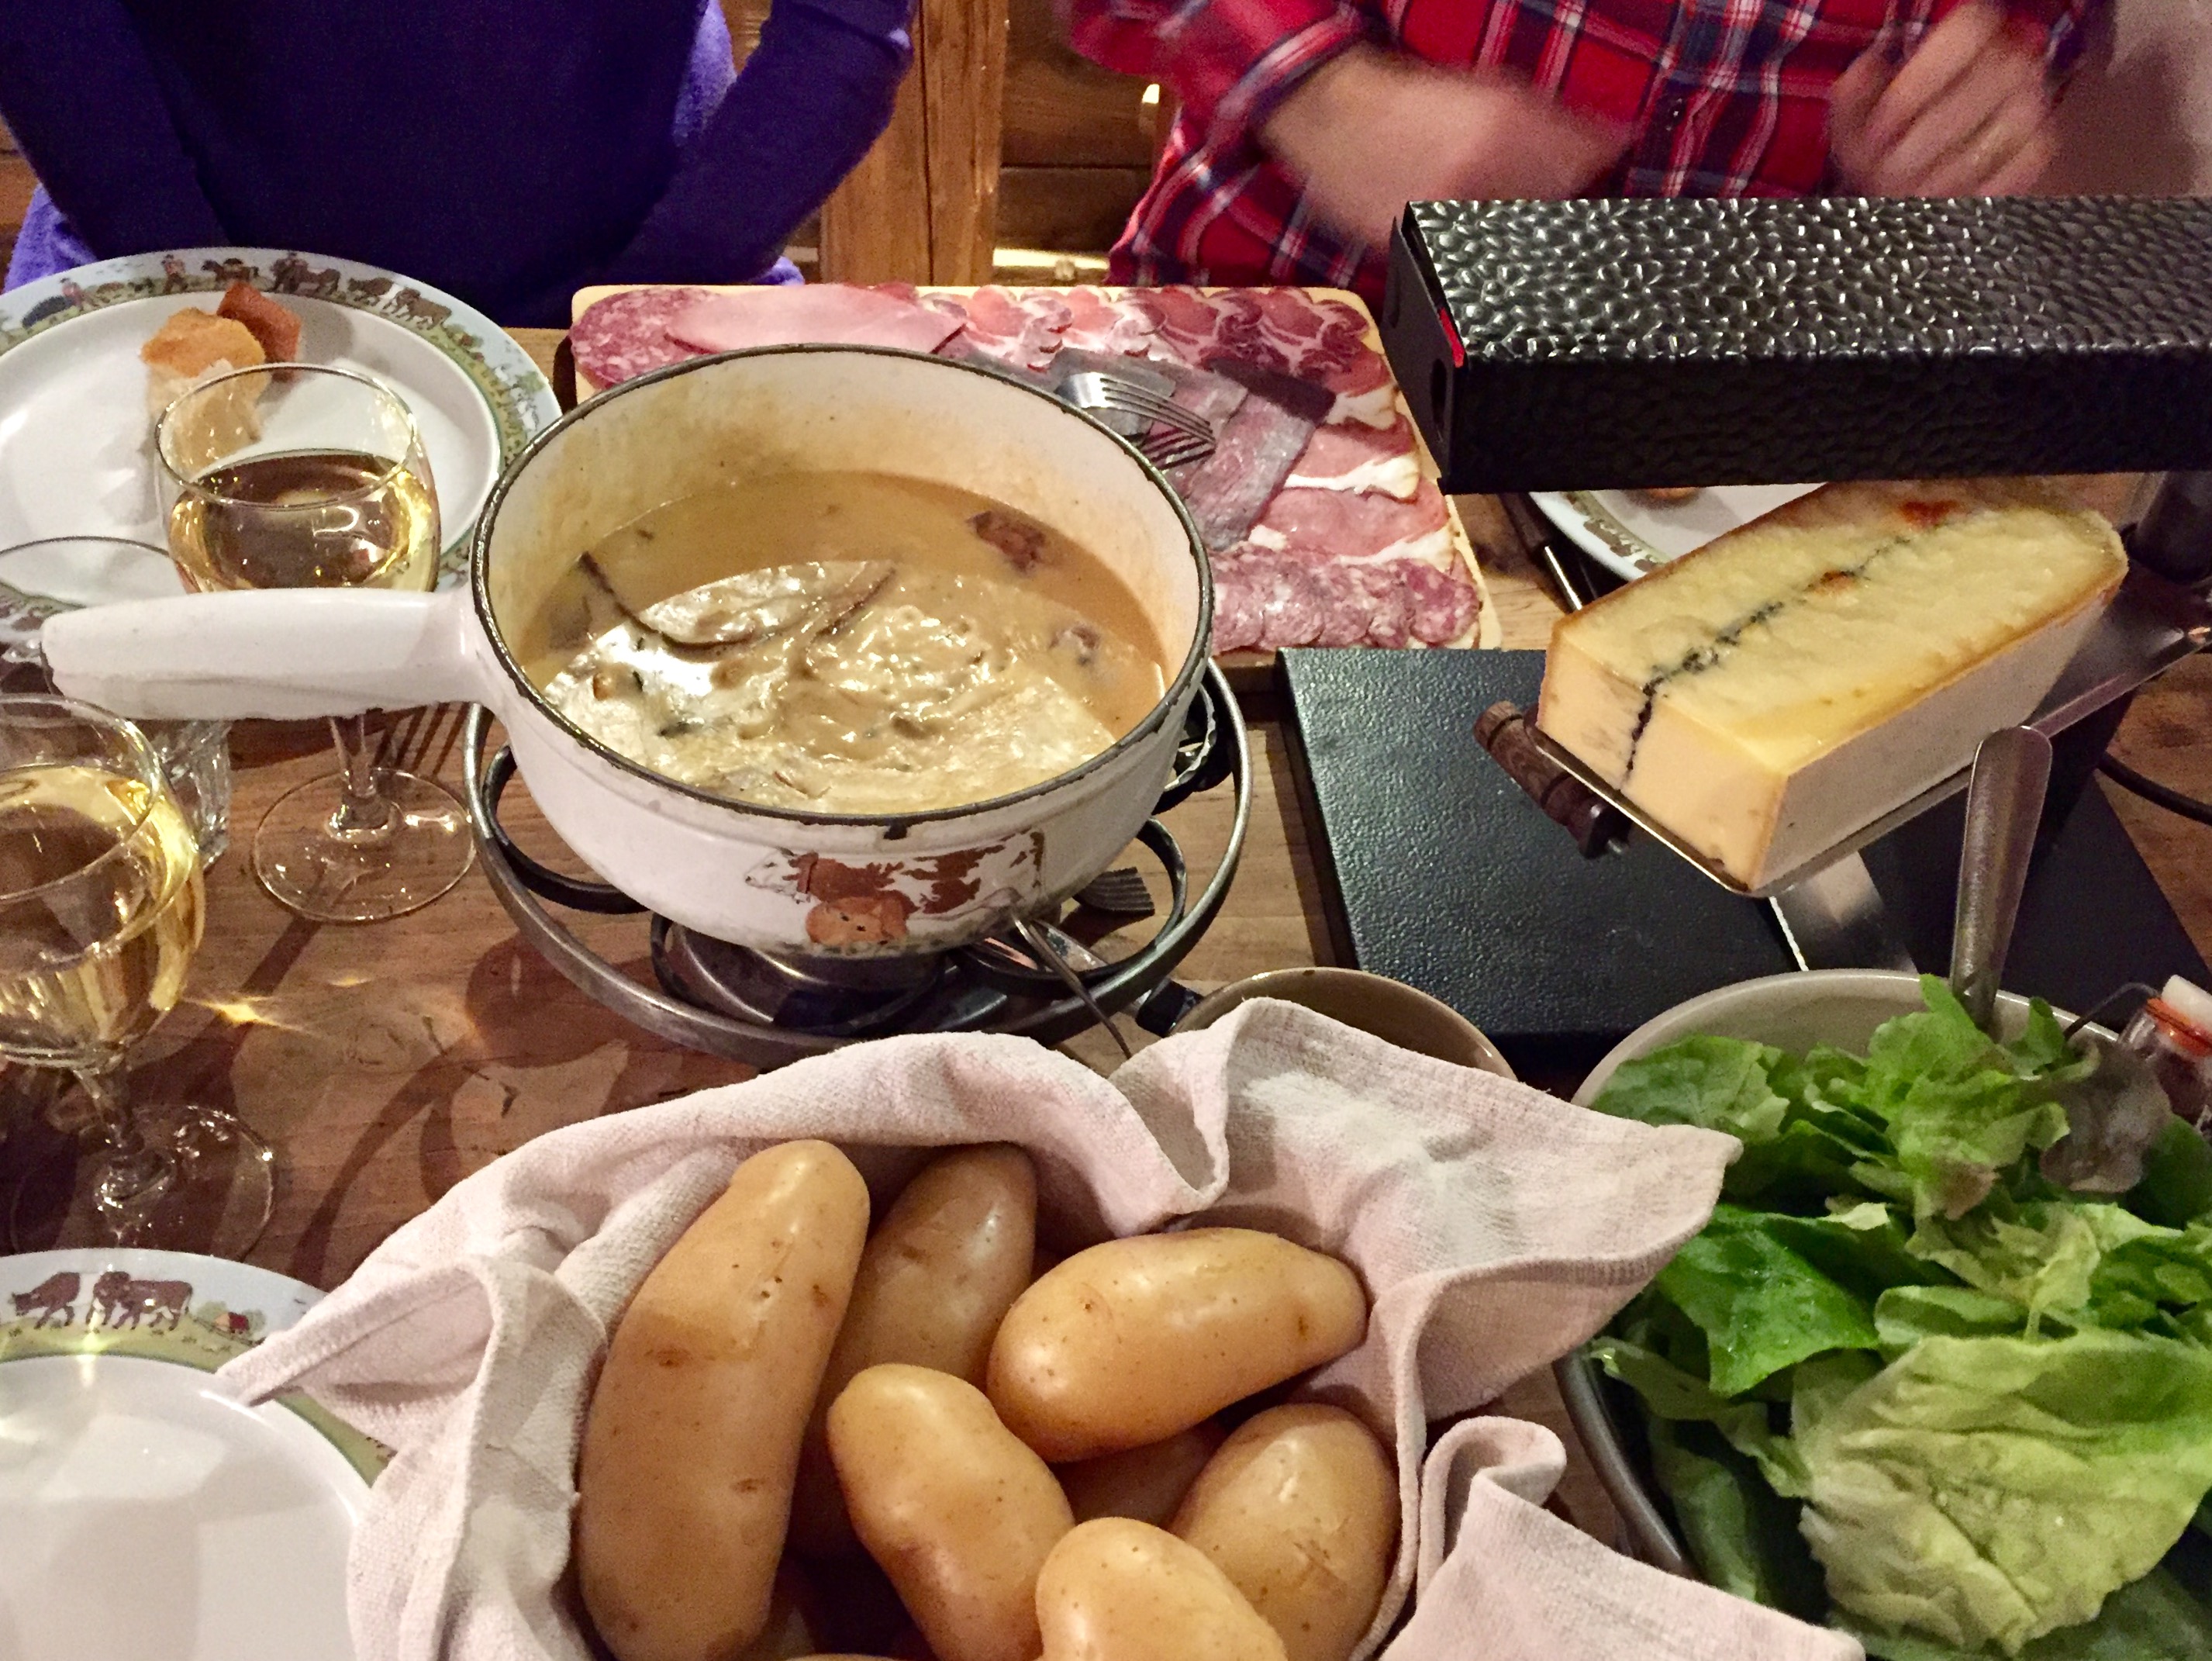 Traditional Savoyard food of fondue and raclette at the Fruitière des Perrières, Les Gets.